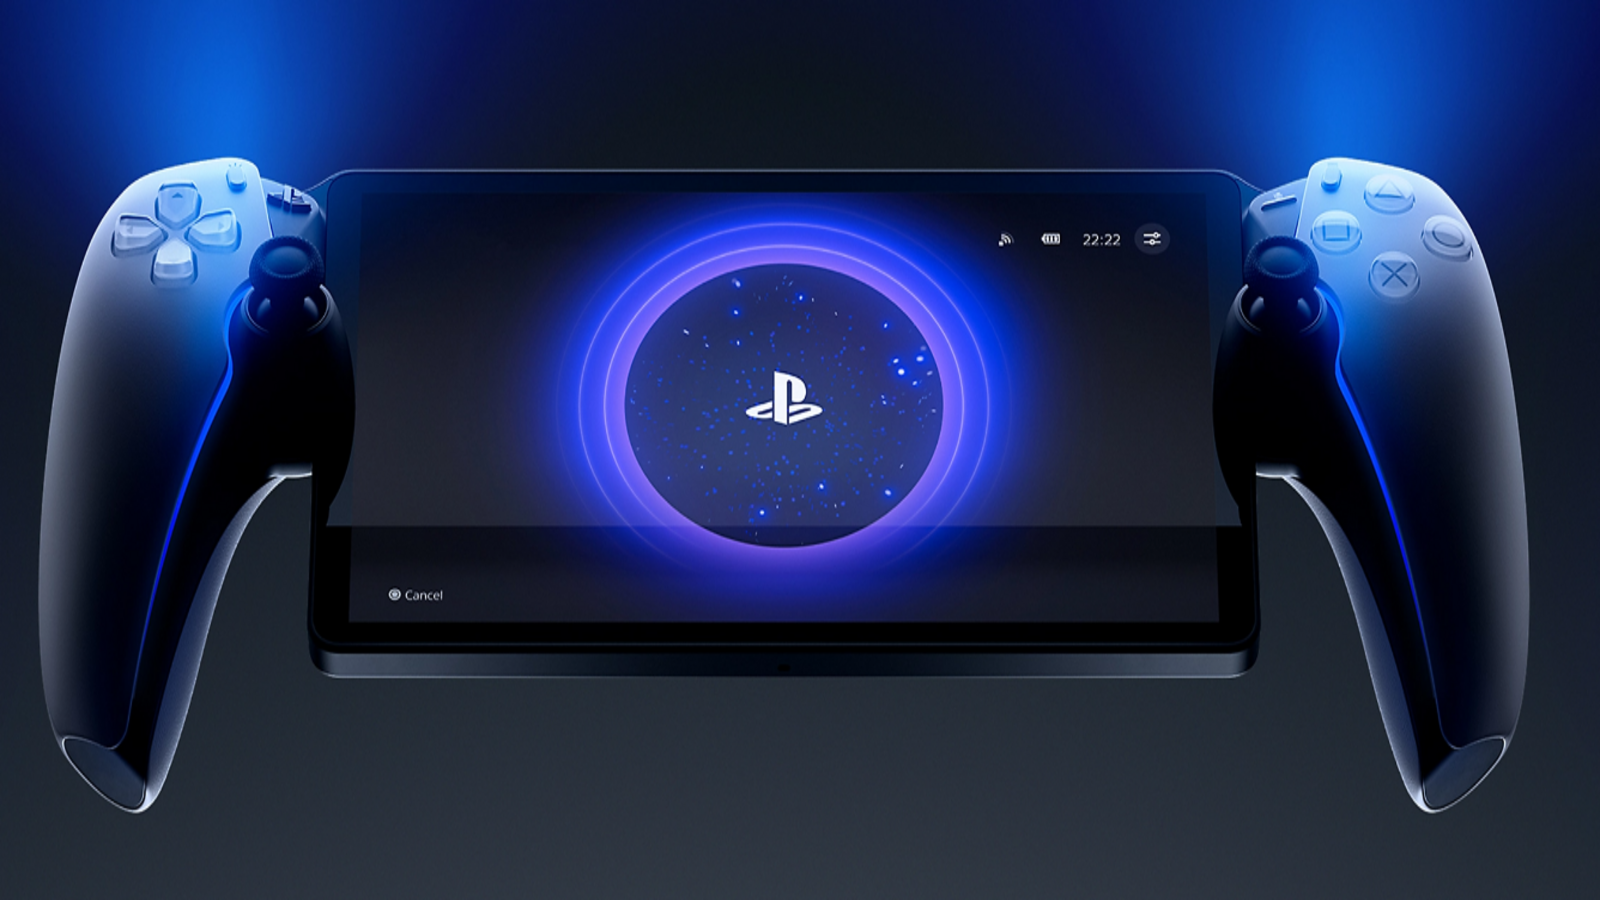 News - Hardware - PlayStation Portal remote player will launch in